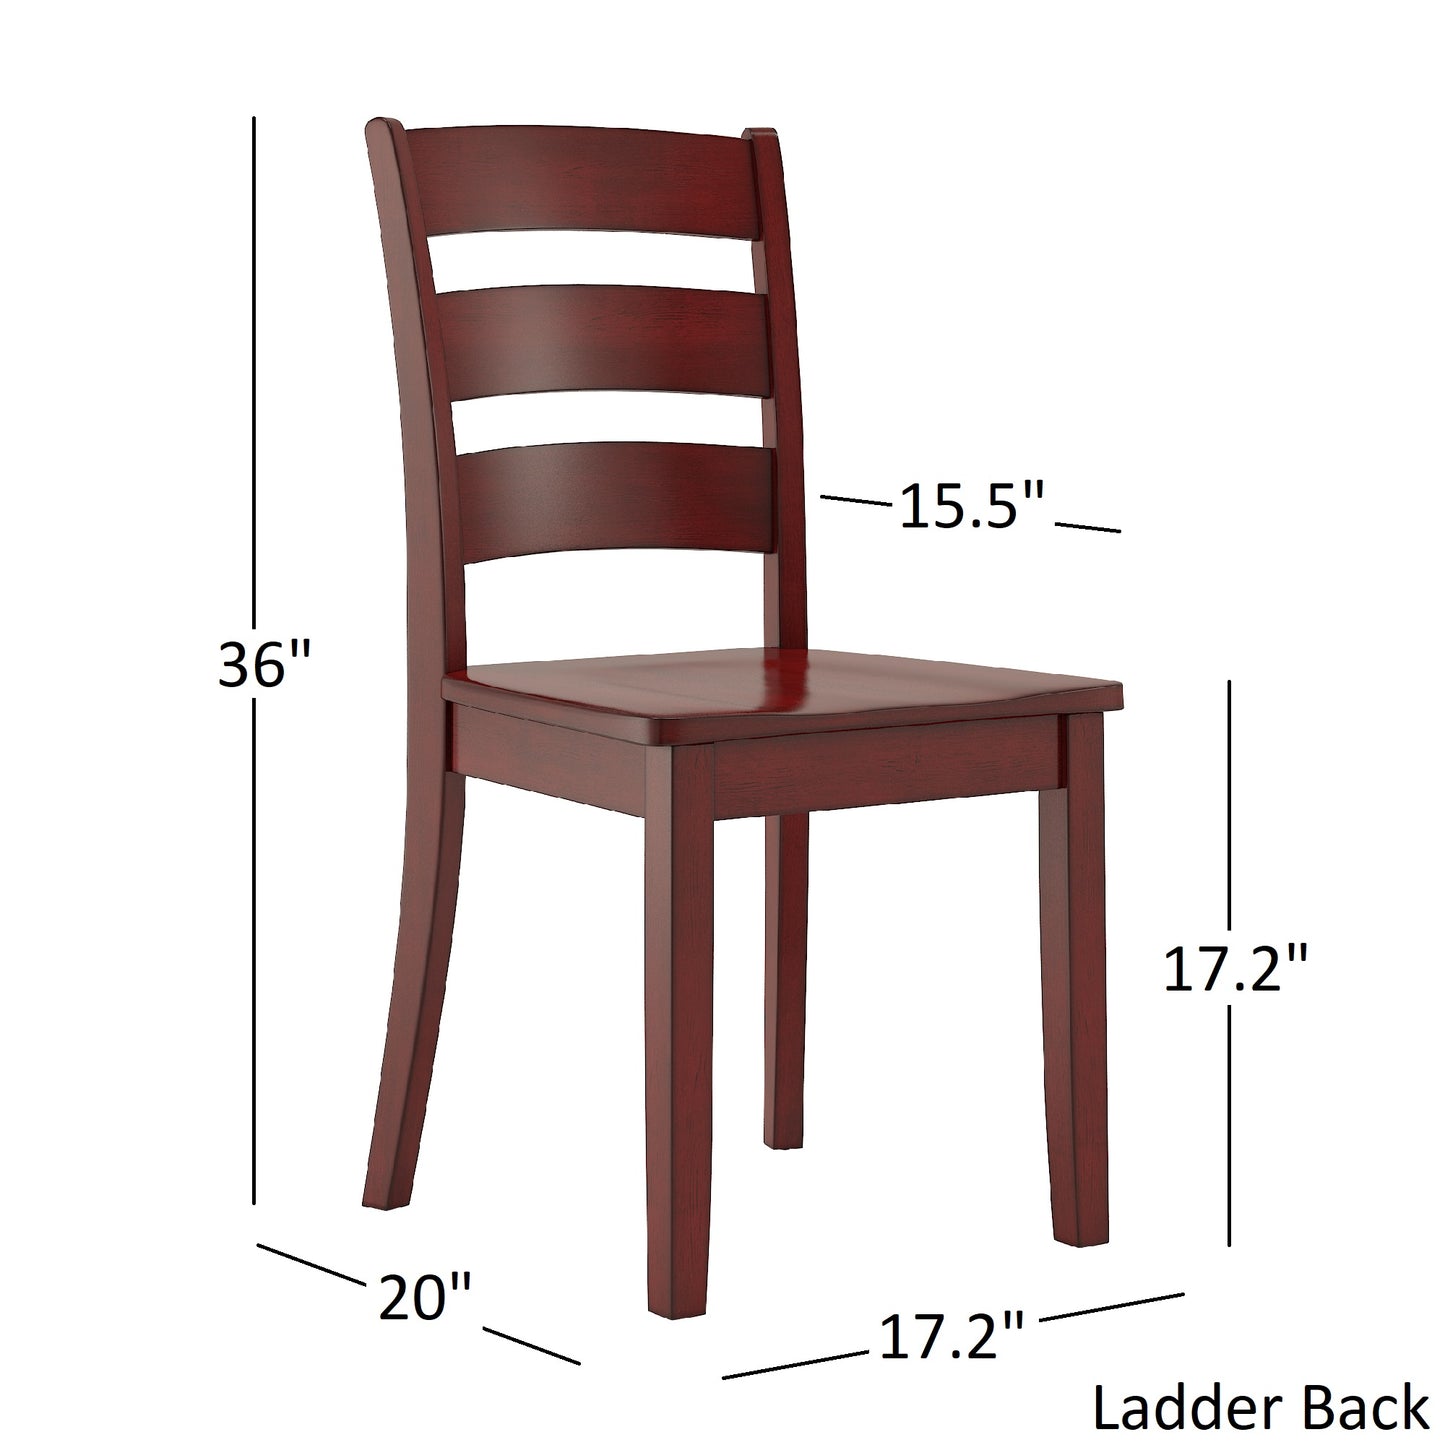 60-inch Rectangular Antique Berry Red Dining Set - Ladder Back Chairs, 7-Piece Set